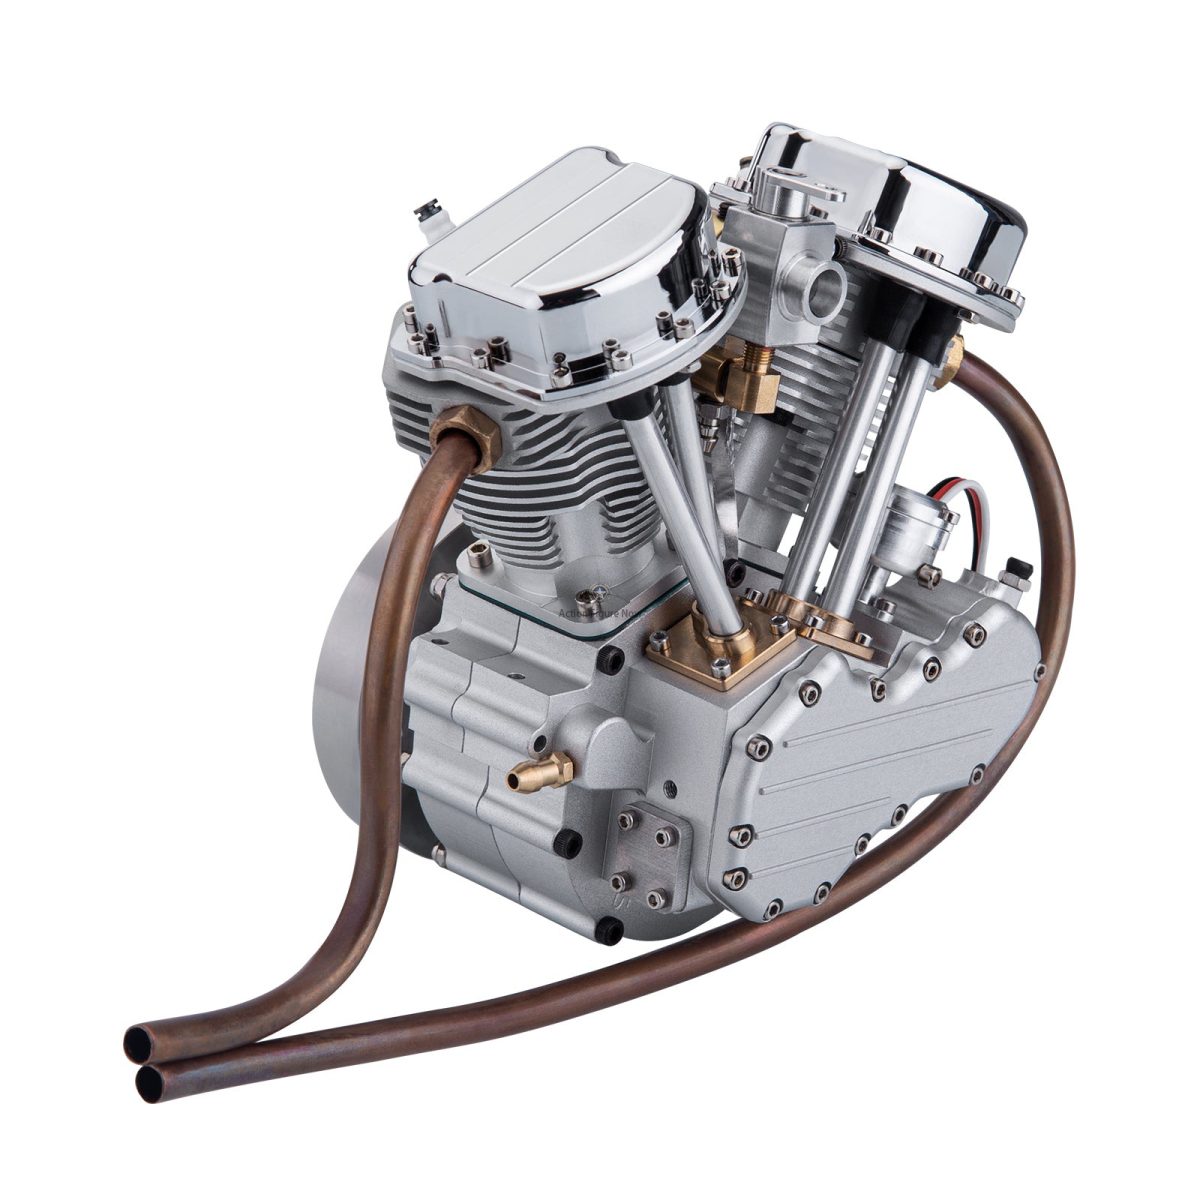 CISON FG-VT9 9cc V2 Engine: V-Twin Dual Cylinder 4-Stroke Air-Cooled Motorcycle Model Engine for RC